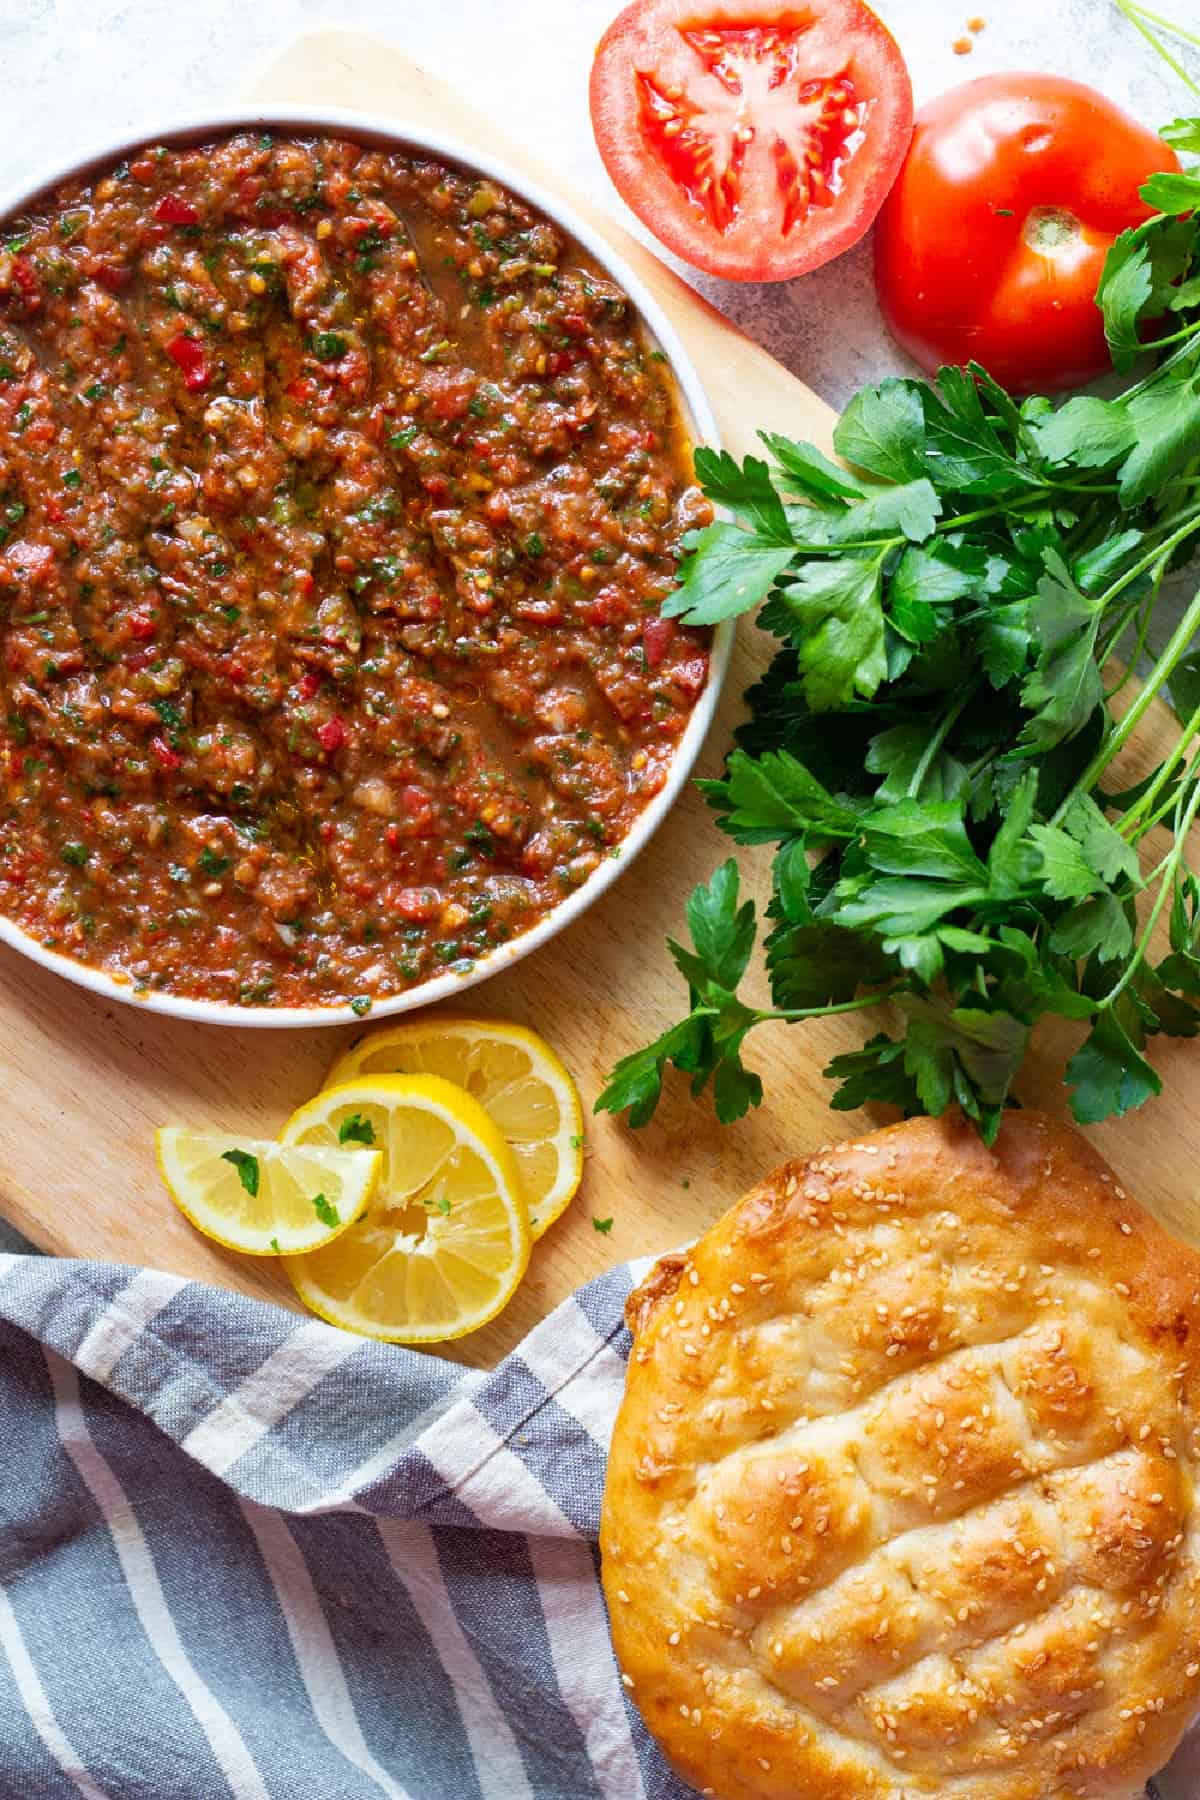 Ezme is a classic Turkish sauce, condiment and appetizer that’s usually served on the side of kebabs with some fresh bread. It’s ready in 10 minutes and is so delicious thanks to tomatoes, peppers and herbs.
